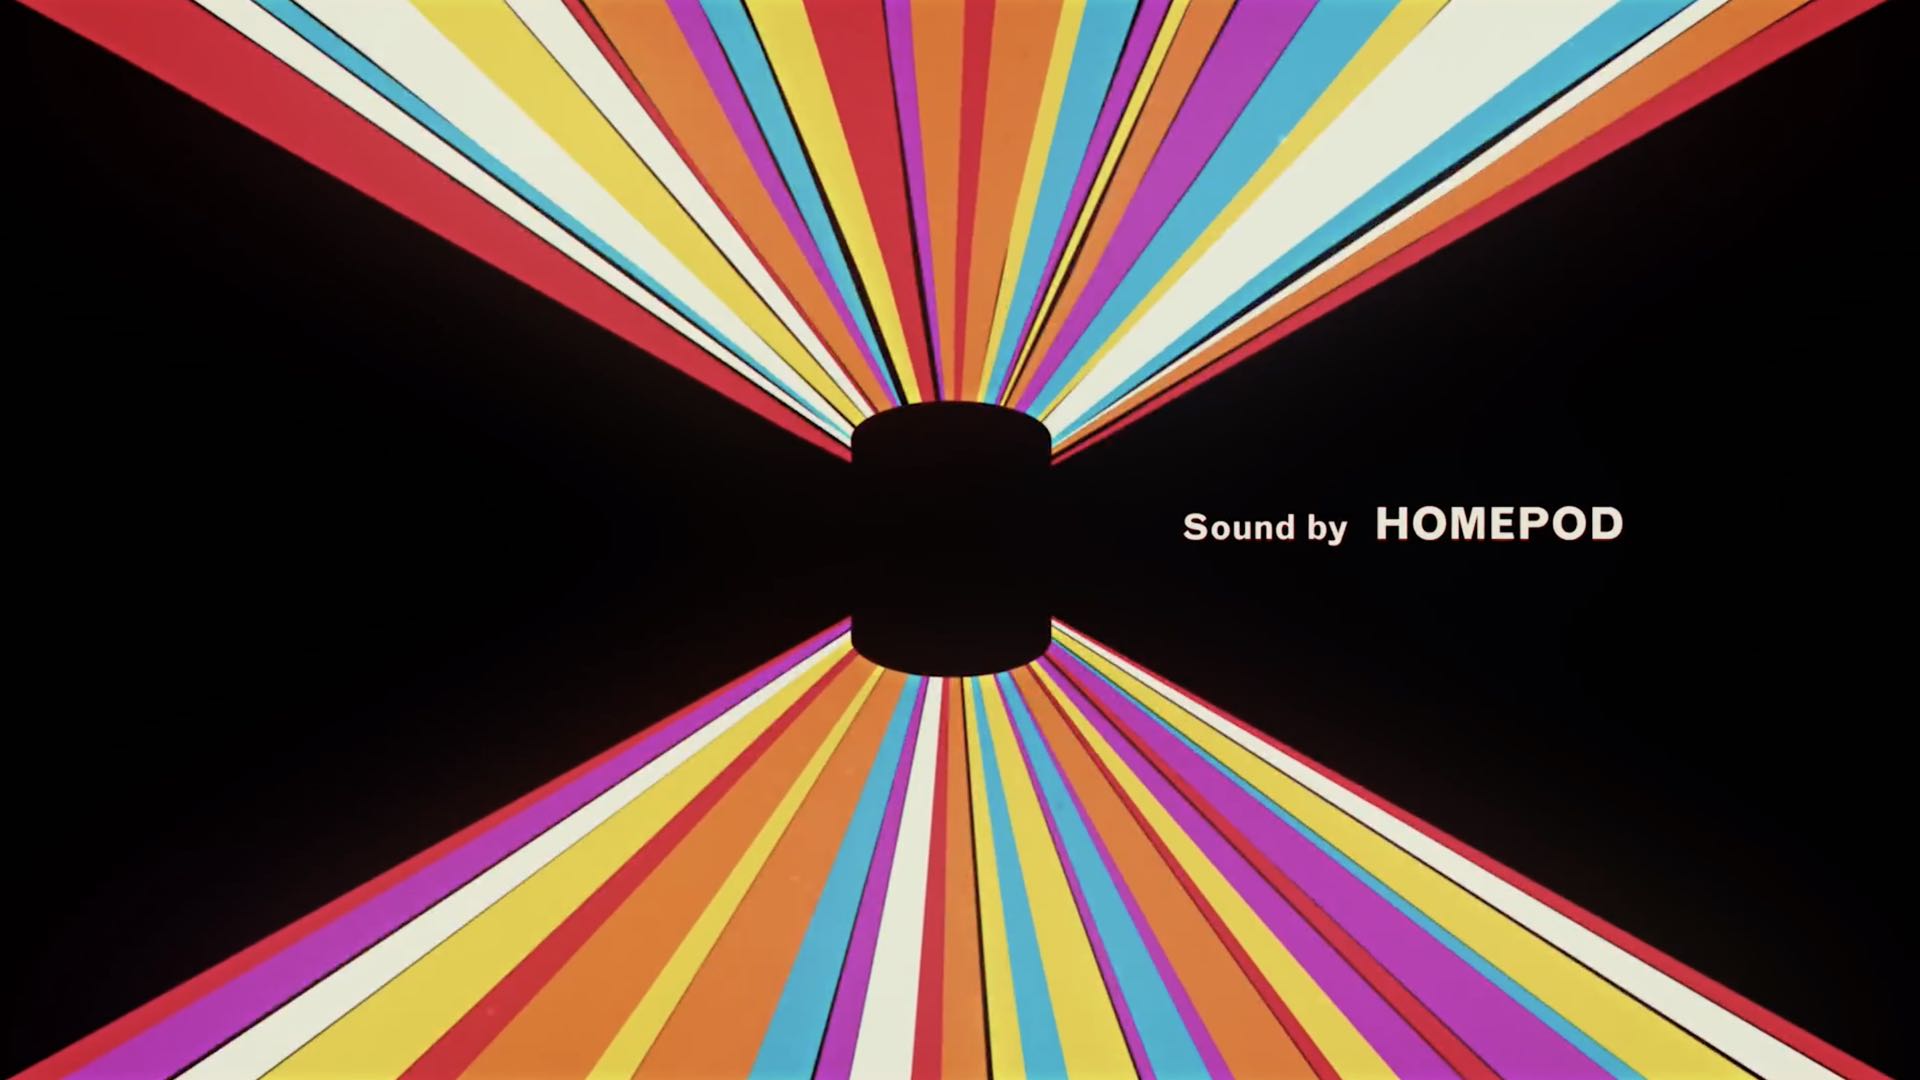 An image taken from Apple's introductory video for HomePod, showing the smart speaker set against a black background with colorful light streaks and the tagline "Sound by HomePod"